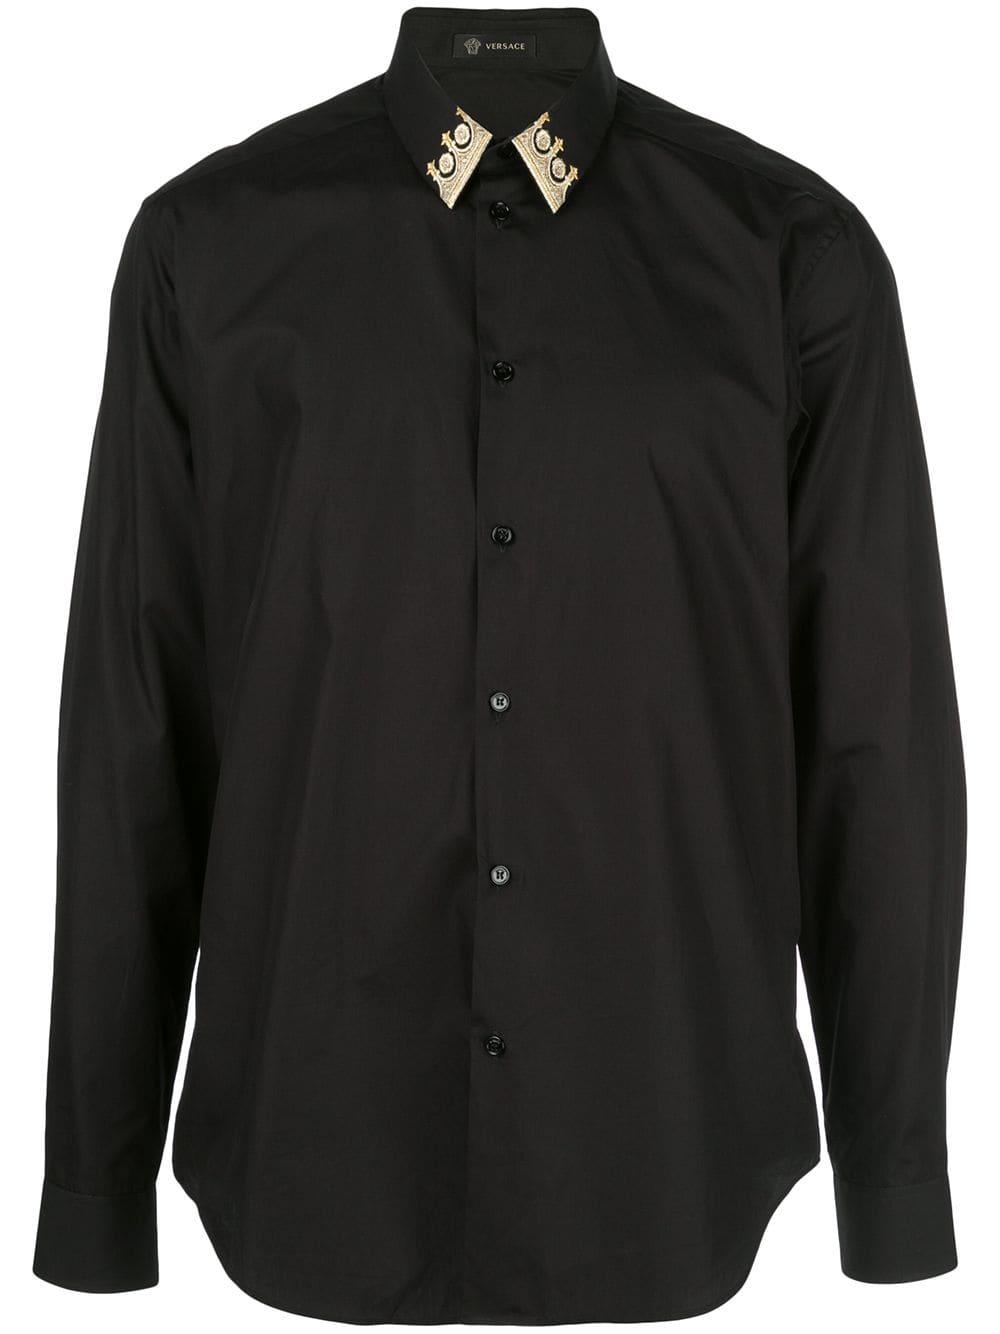 Versace Cotton Embroidered Collar Shirt in Black for Men - Lyst